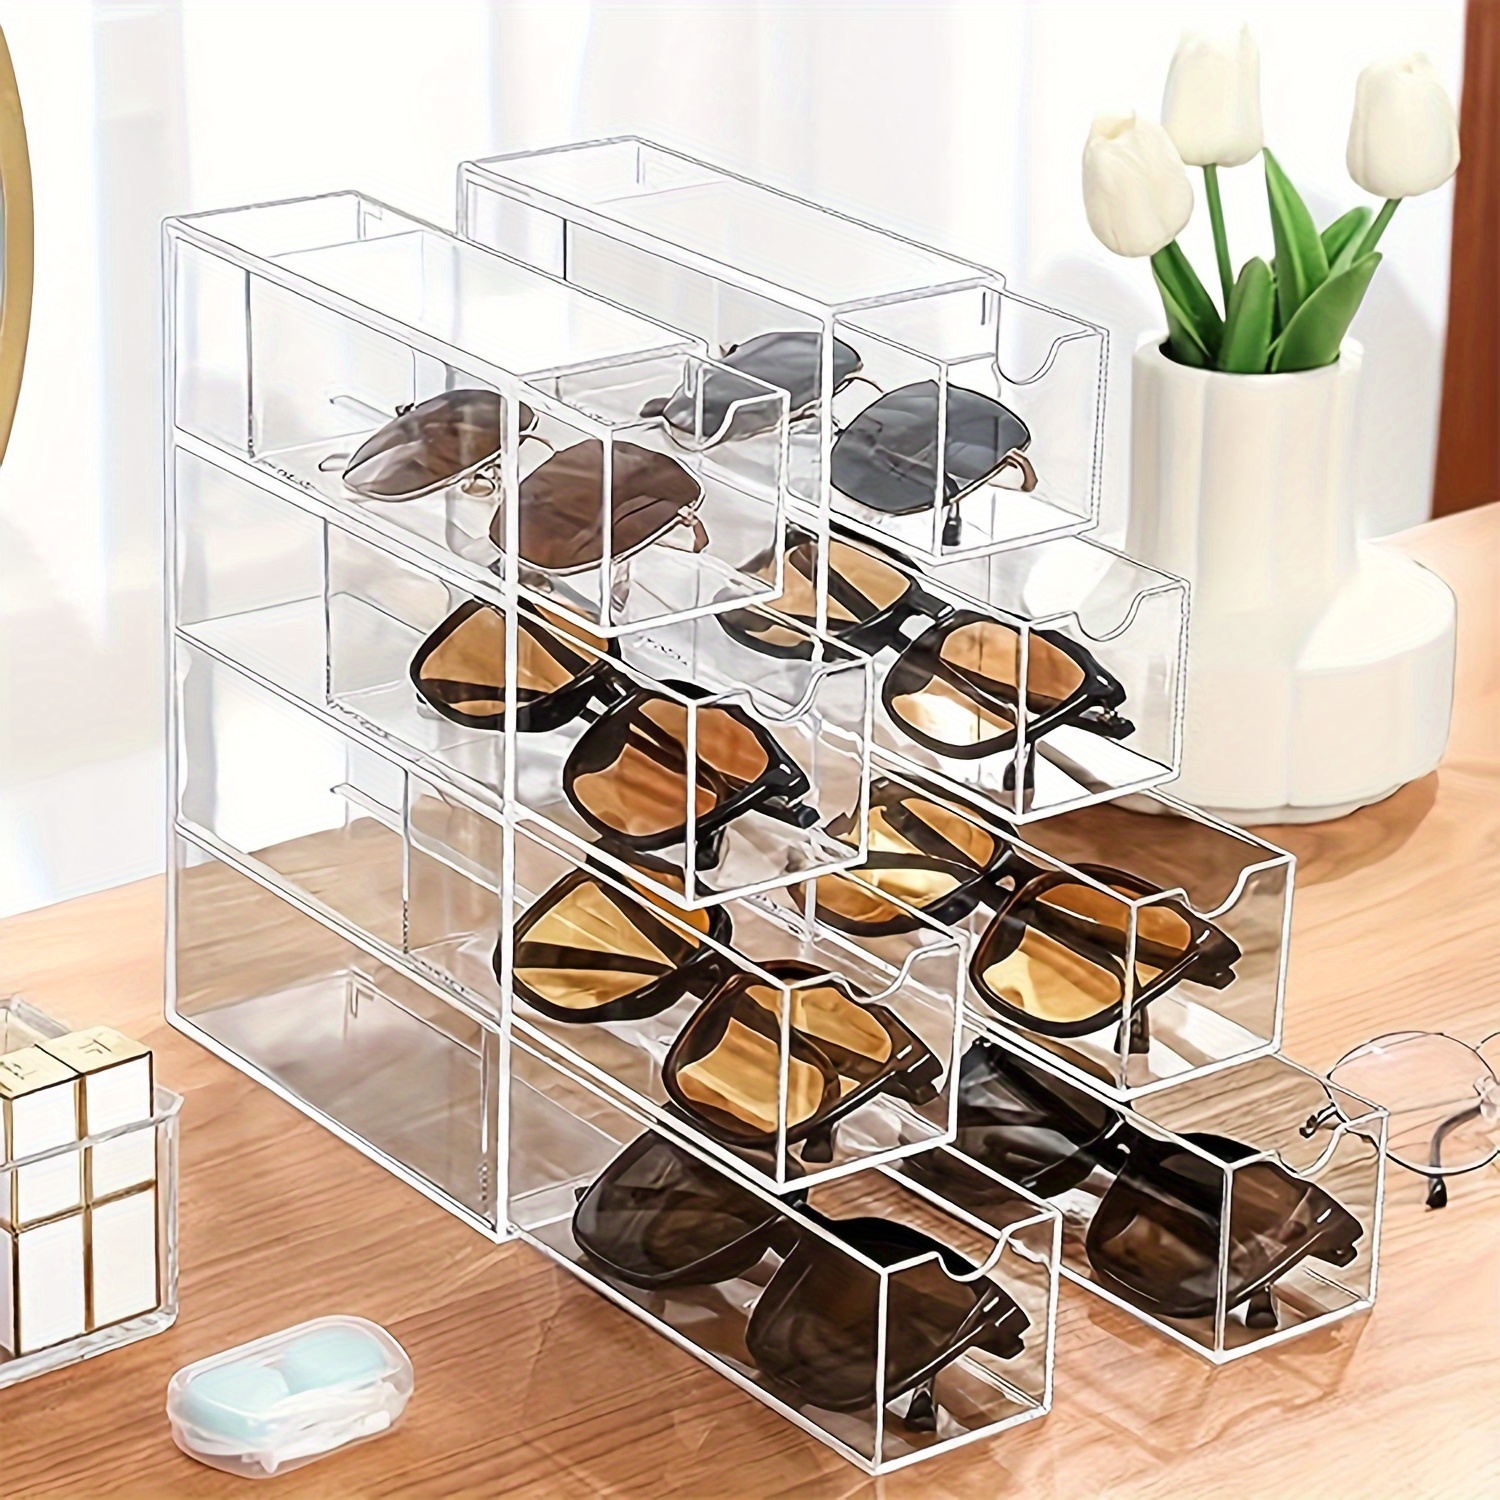 

Transparent Acrylic Sunglasses Storage Box With 4 Drawers For Women And Men's Glasses - Stackable Eyeglass Frame Display Box